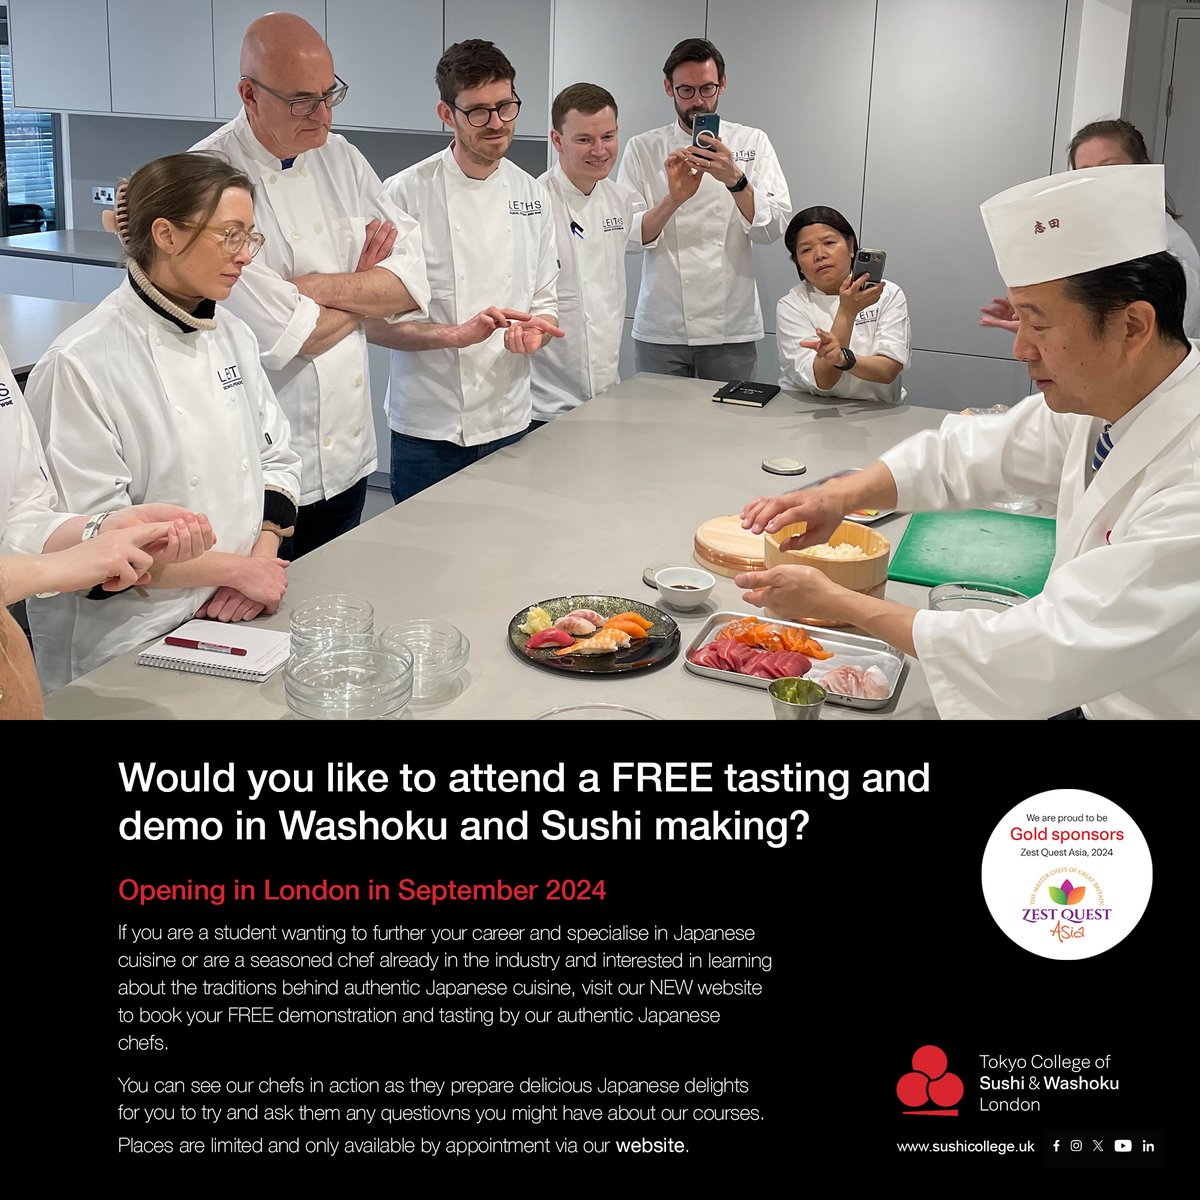 Have you heard about our free demo sessions? During the FREE sessions, the College’s chefs will demonstrate how to cook elements of this ever-growing and highly popular cuisine, and tastings are encouraged! #Sushi #Washoku #Japan #Food